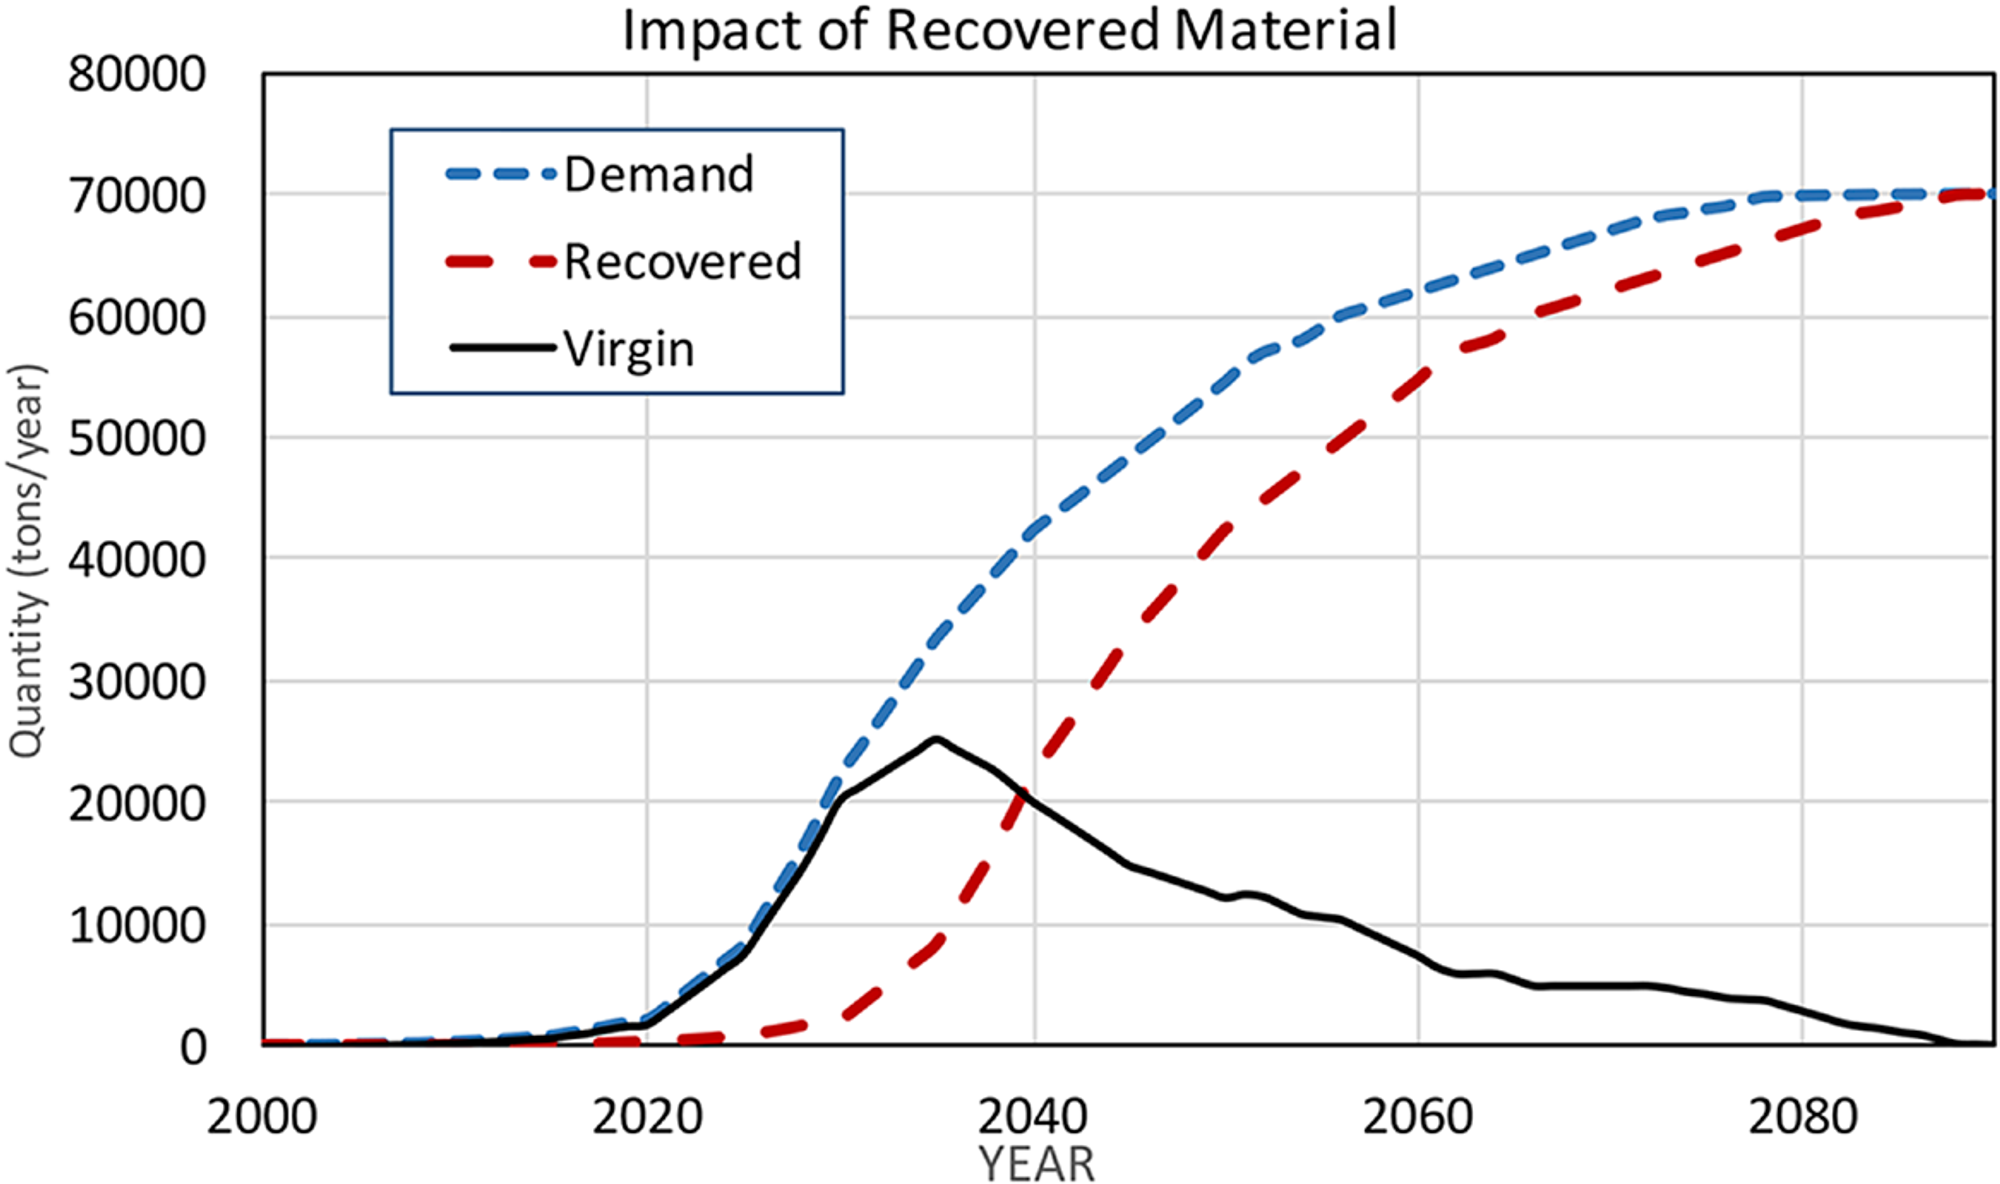 An optimistic scenario if recycling capacity for electric-vehicle batteries expands.